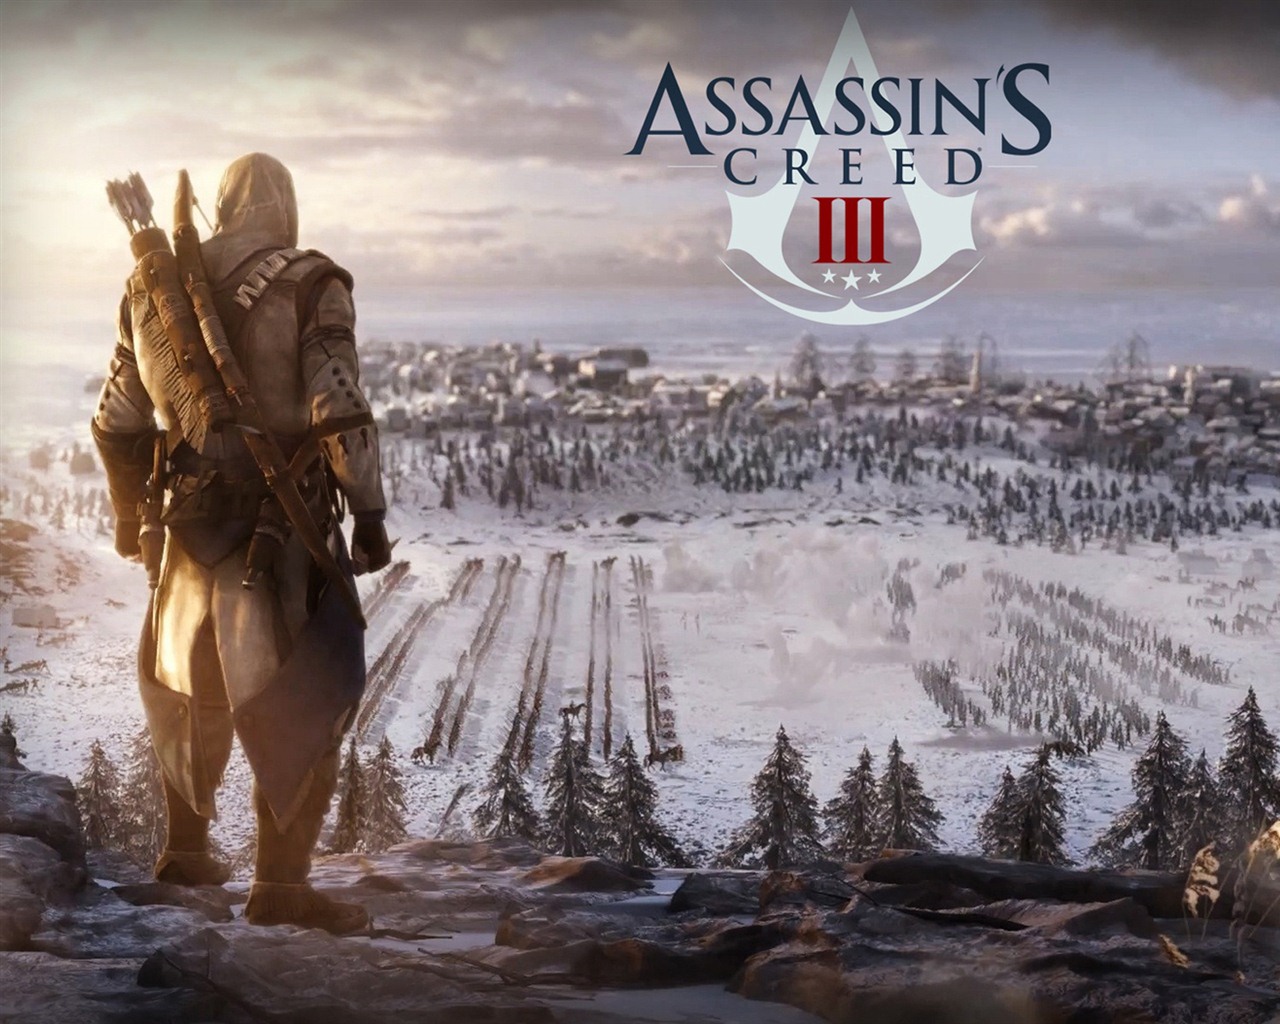 Assassin's Creed 3 HD wallpapers #17 - 1280x1024